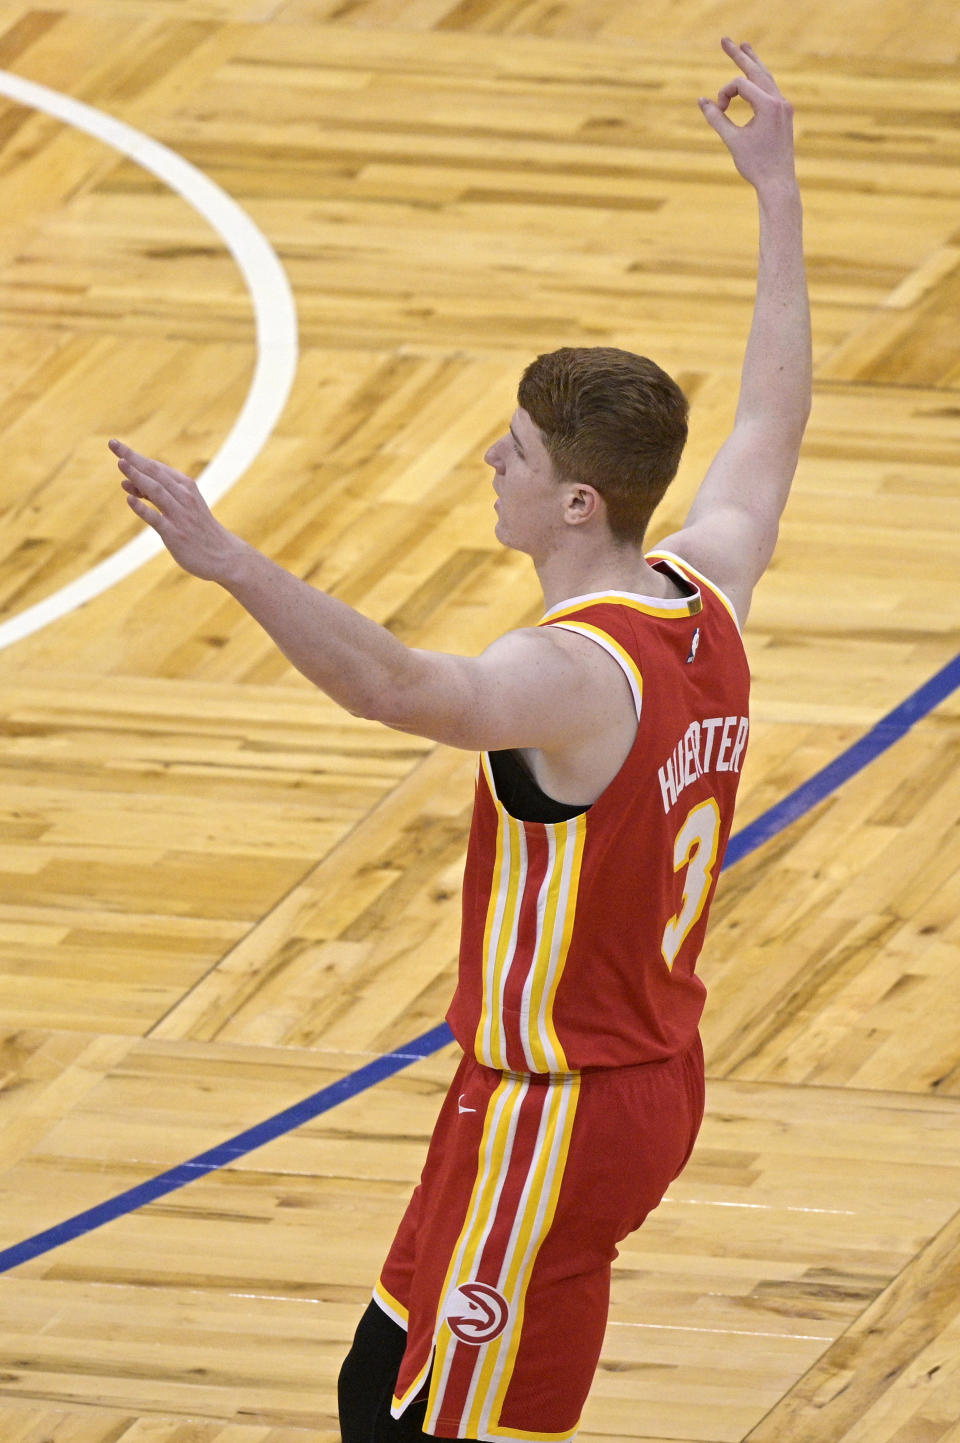 Atlanta Hawks guard Kevin Huerter celebrates after scoring a 3-pointer during the second half of the team's NBA basketball game against the Orlando Magic, Wednesday, March 3, 2021, in Orlando, Fla. (AP Photo/Phelan M. Ebenhack)